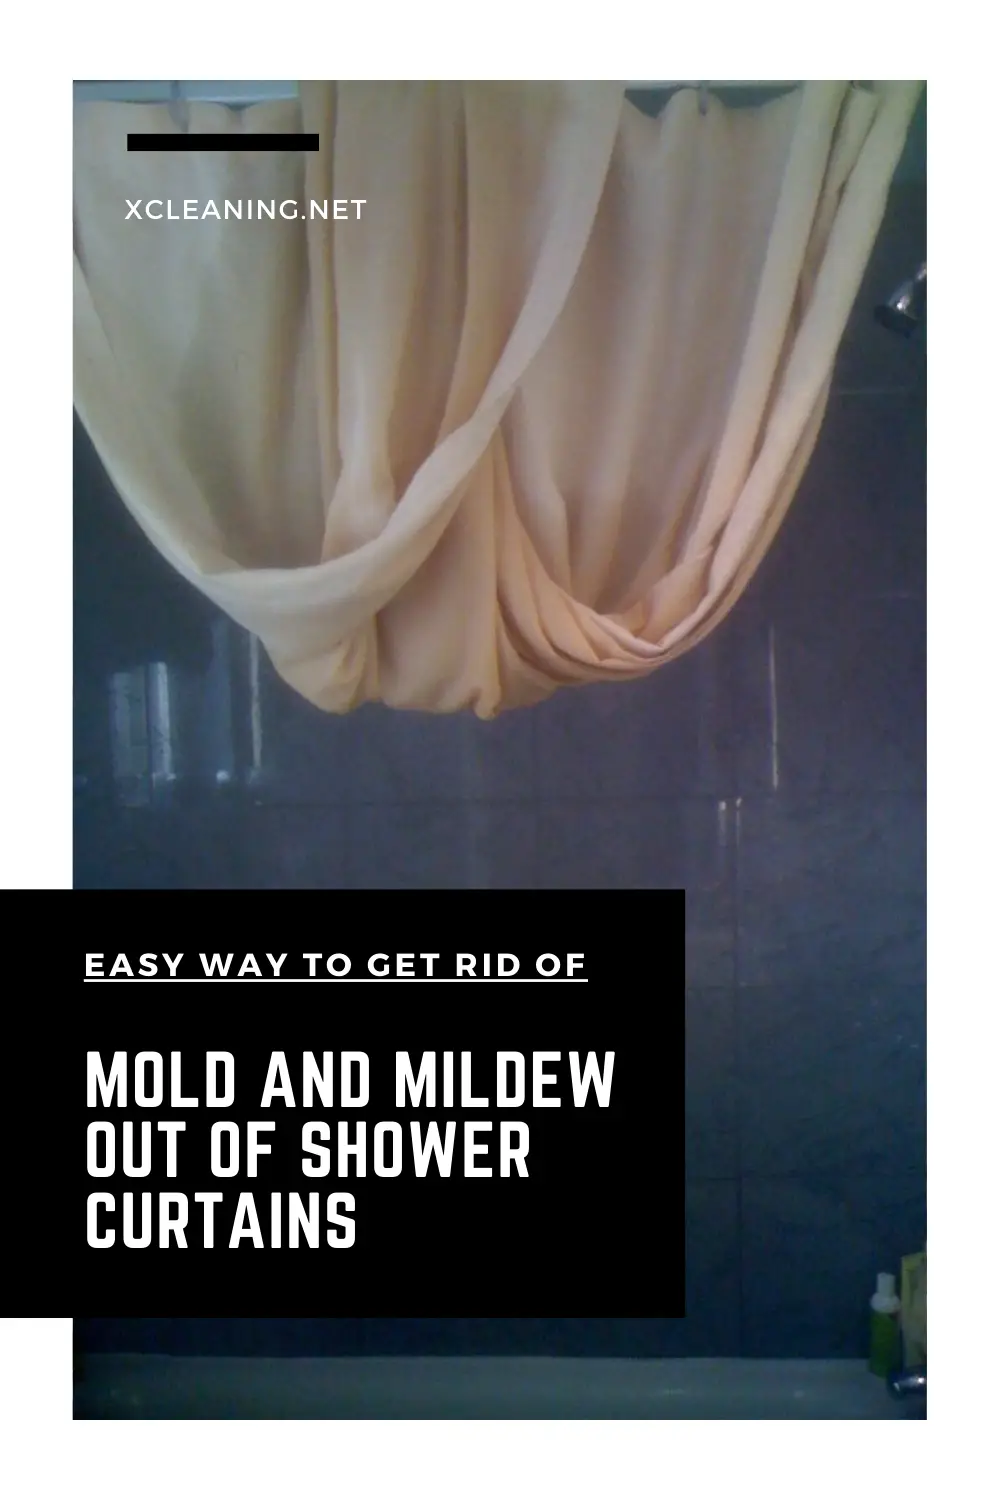 Easy Way To Get Rid Of Mold And Mildew Out Of Shower Curtains ...